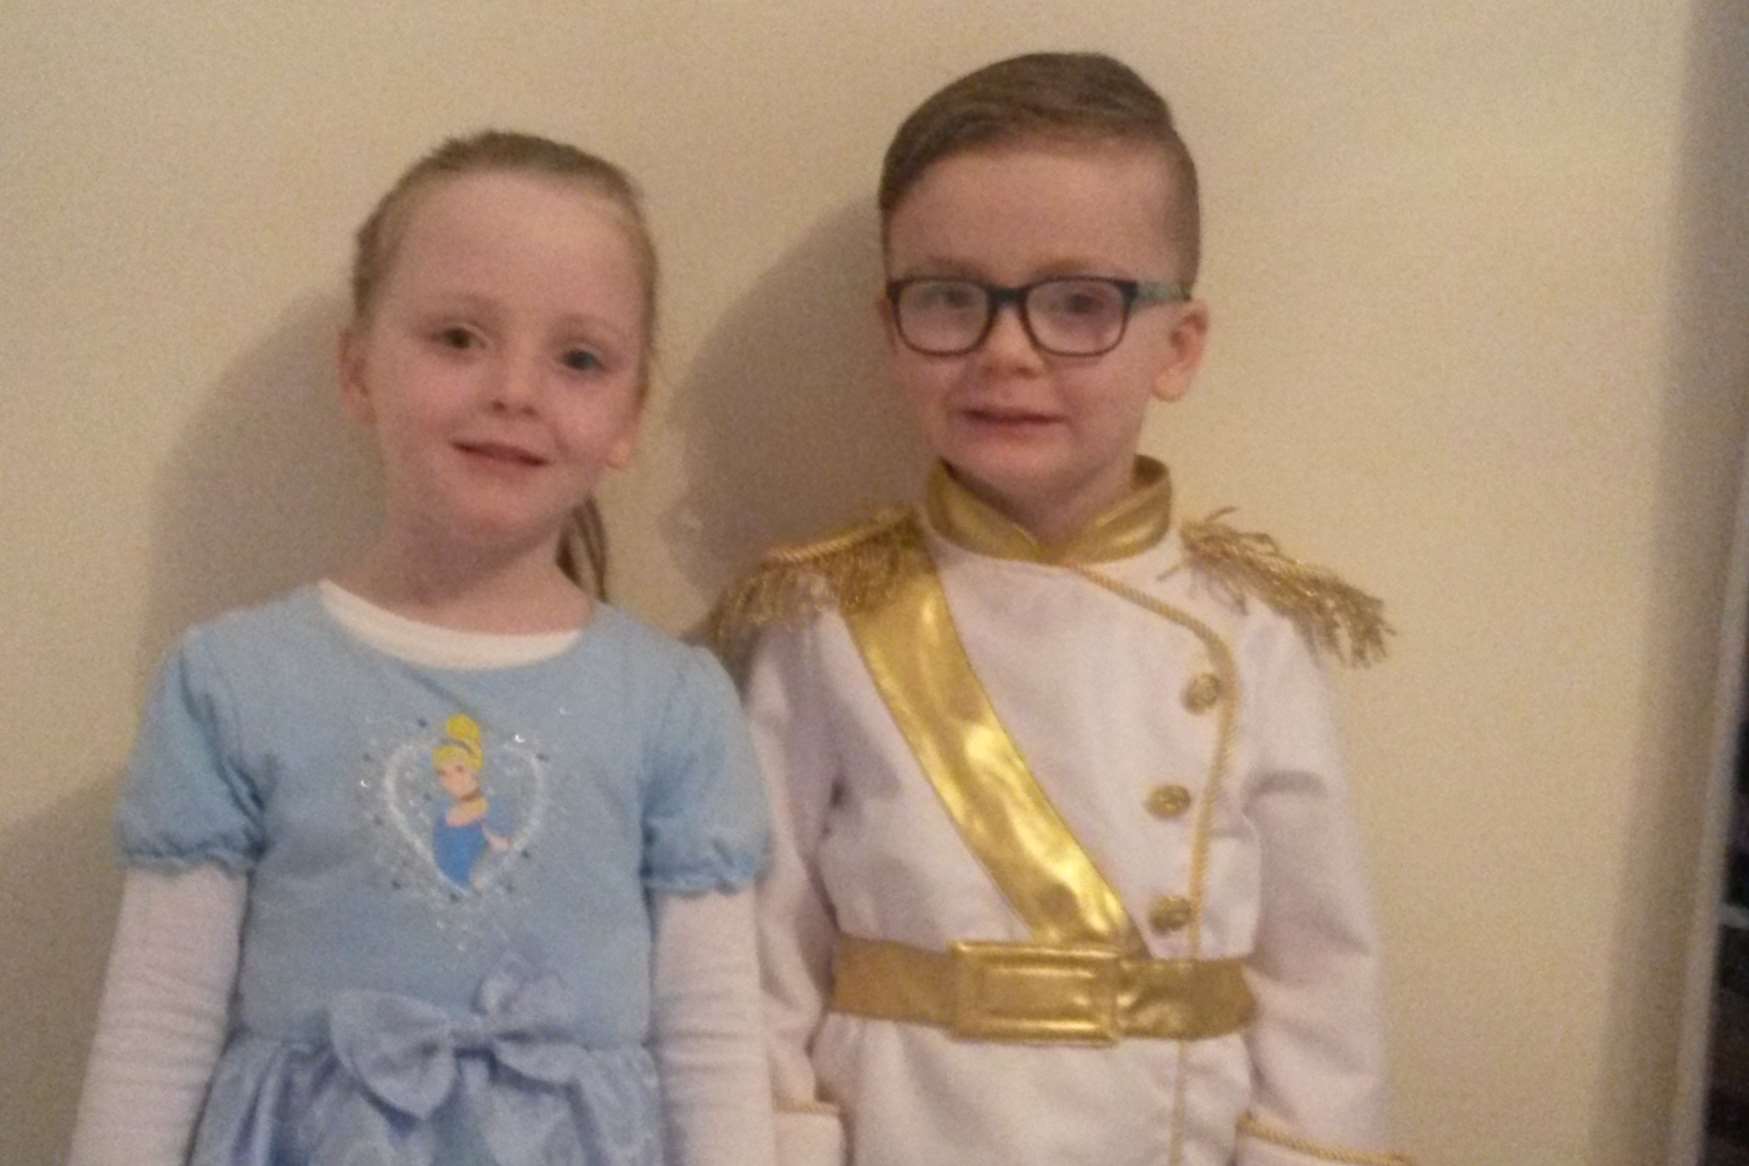 Twins Archie and Ava as fairytale duo Cinderella and Prince Charming